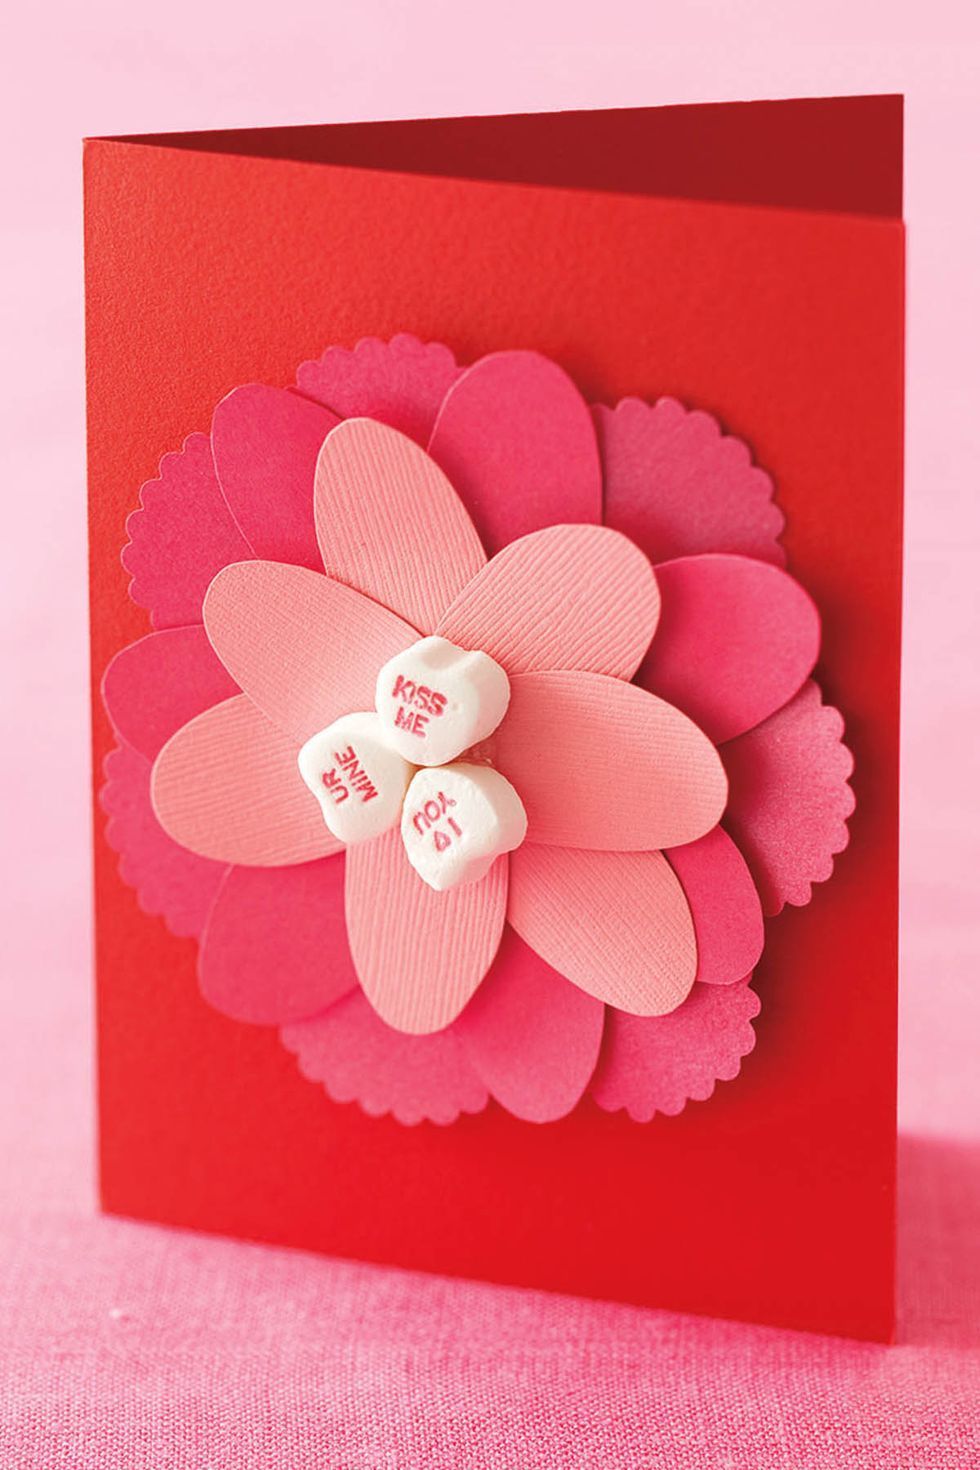 red valentine's day card with pink 3d flower on front made from cut paper petals and candy conversation hearts center